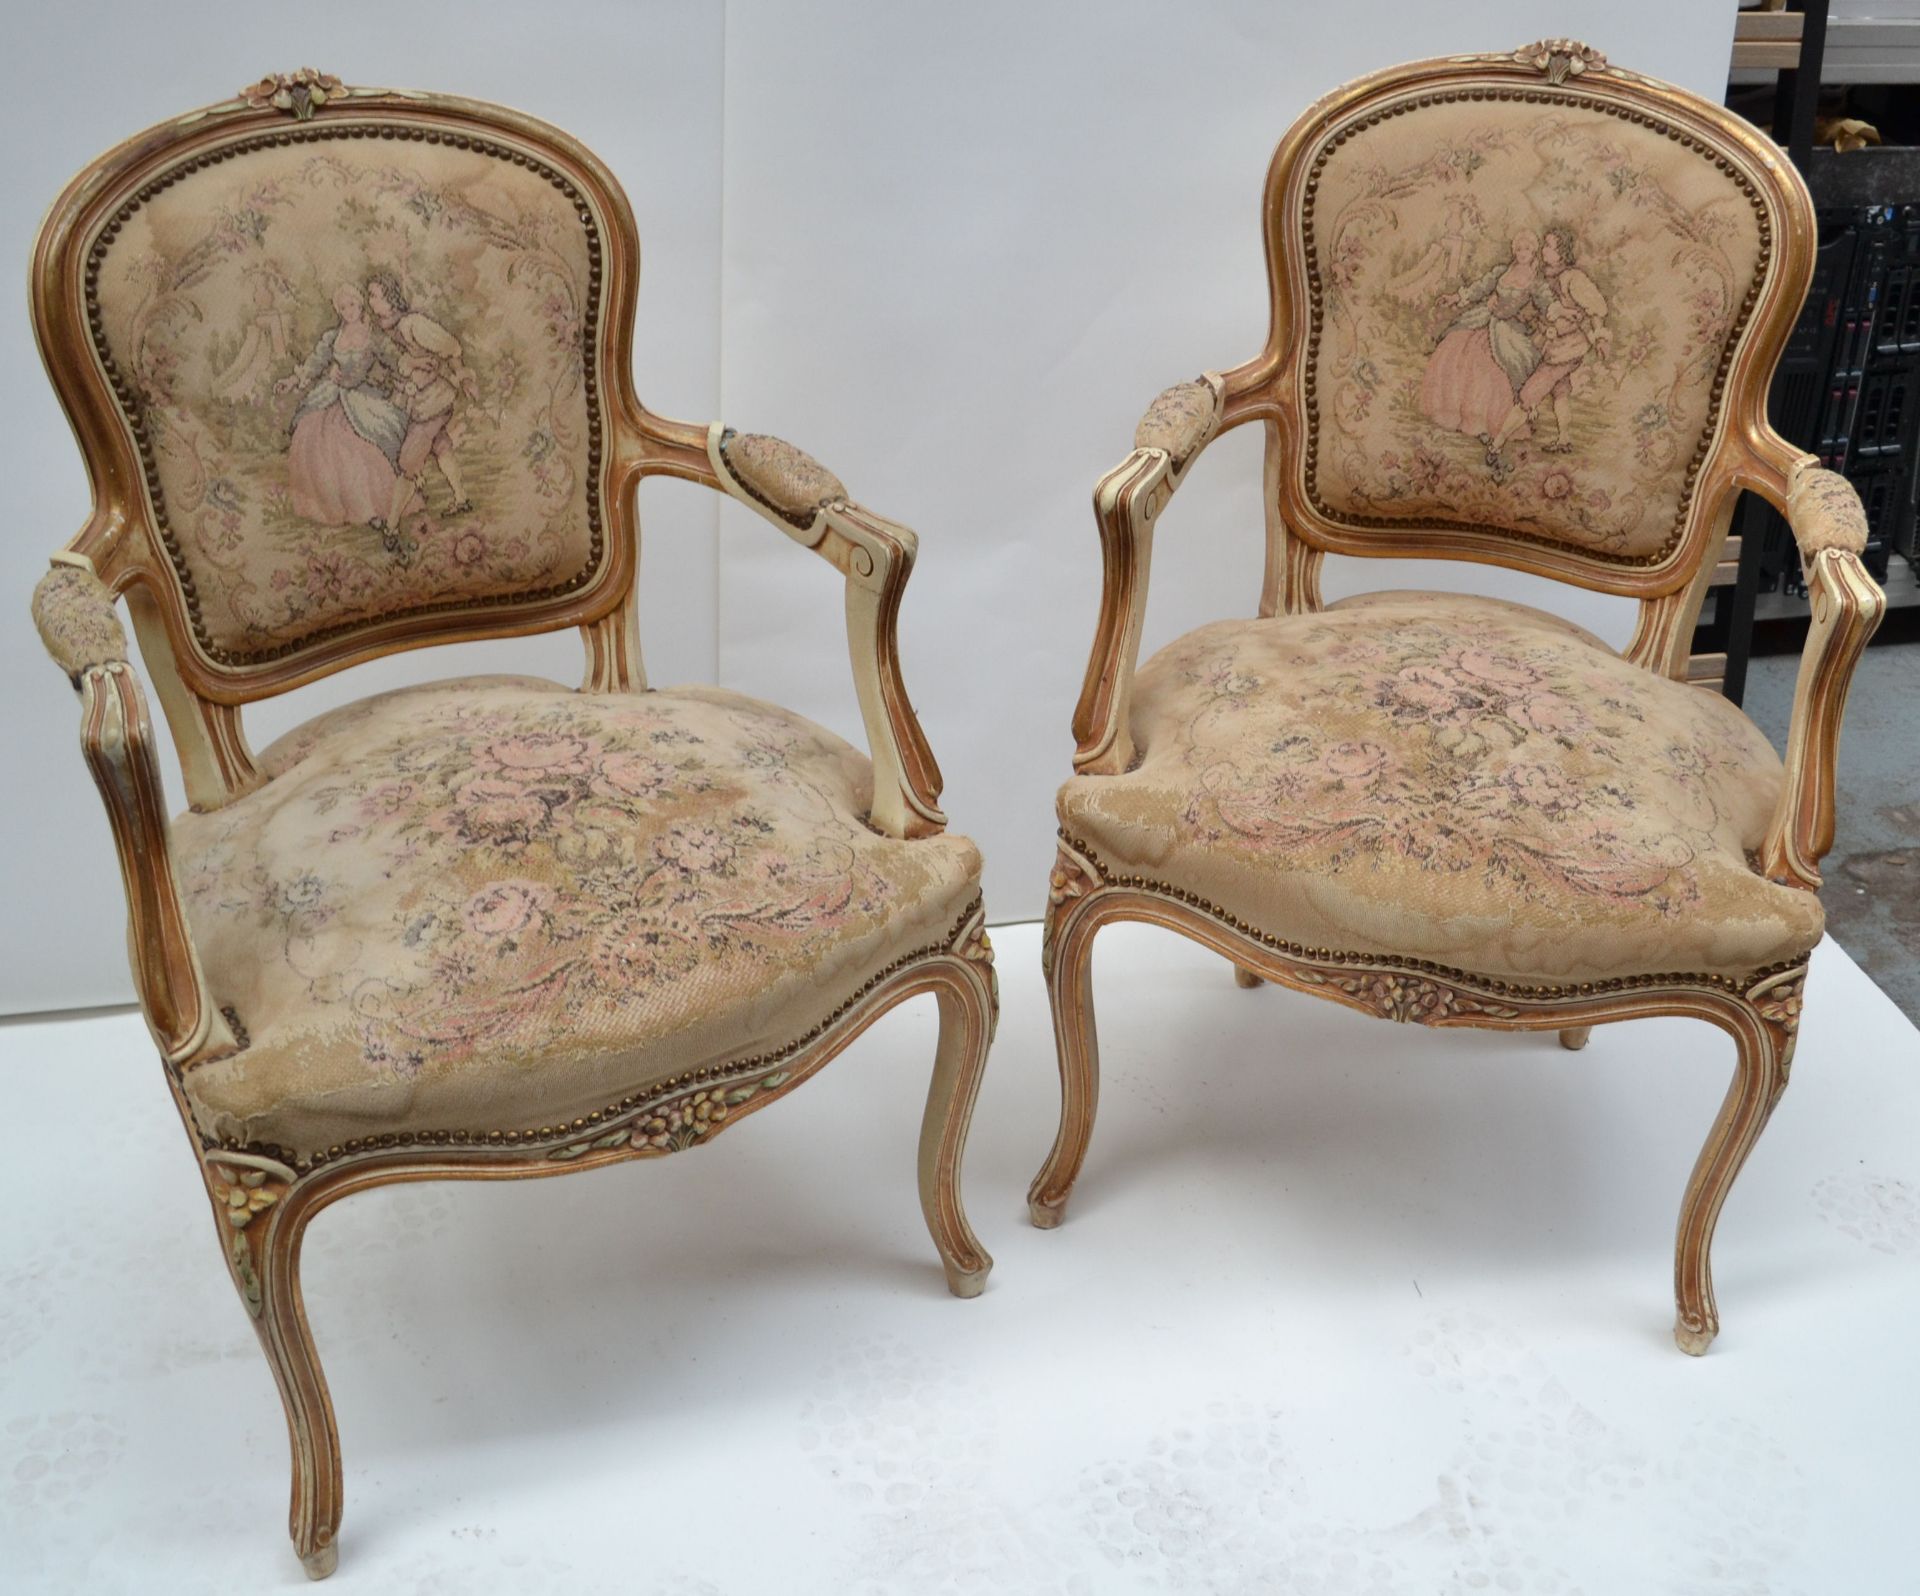 2 x Attractive Waring & Gillow Vintage Chairs - AE002 - CL007 - Location: Altrincham WA14 - Image 13 of 19